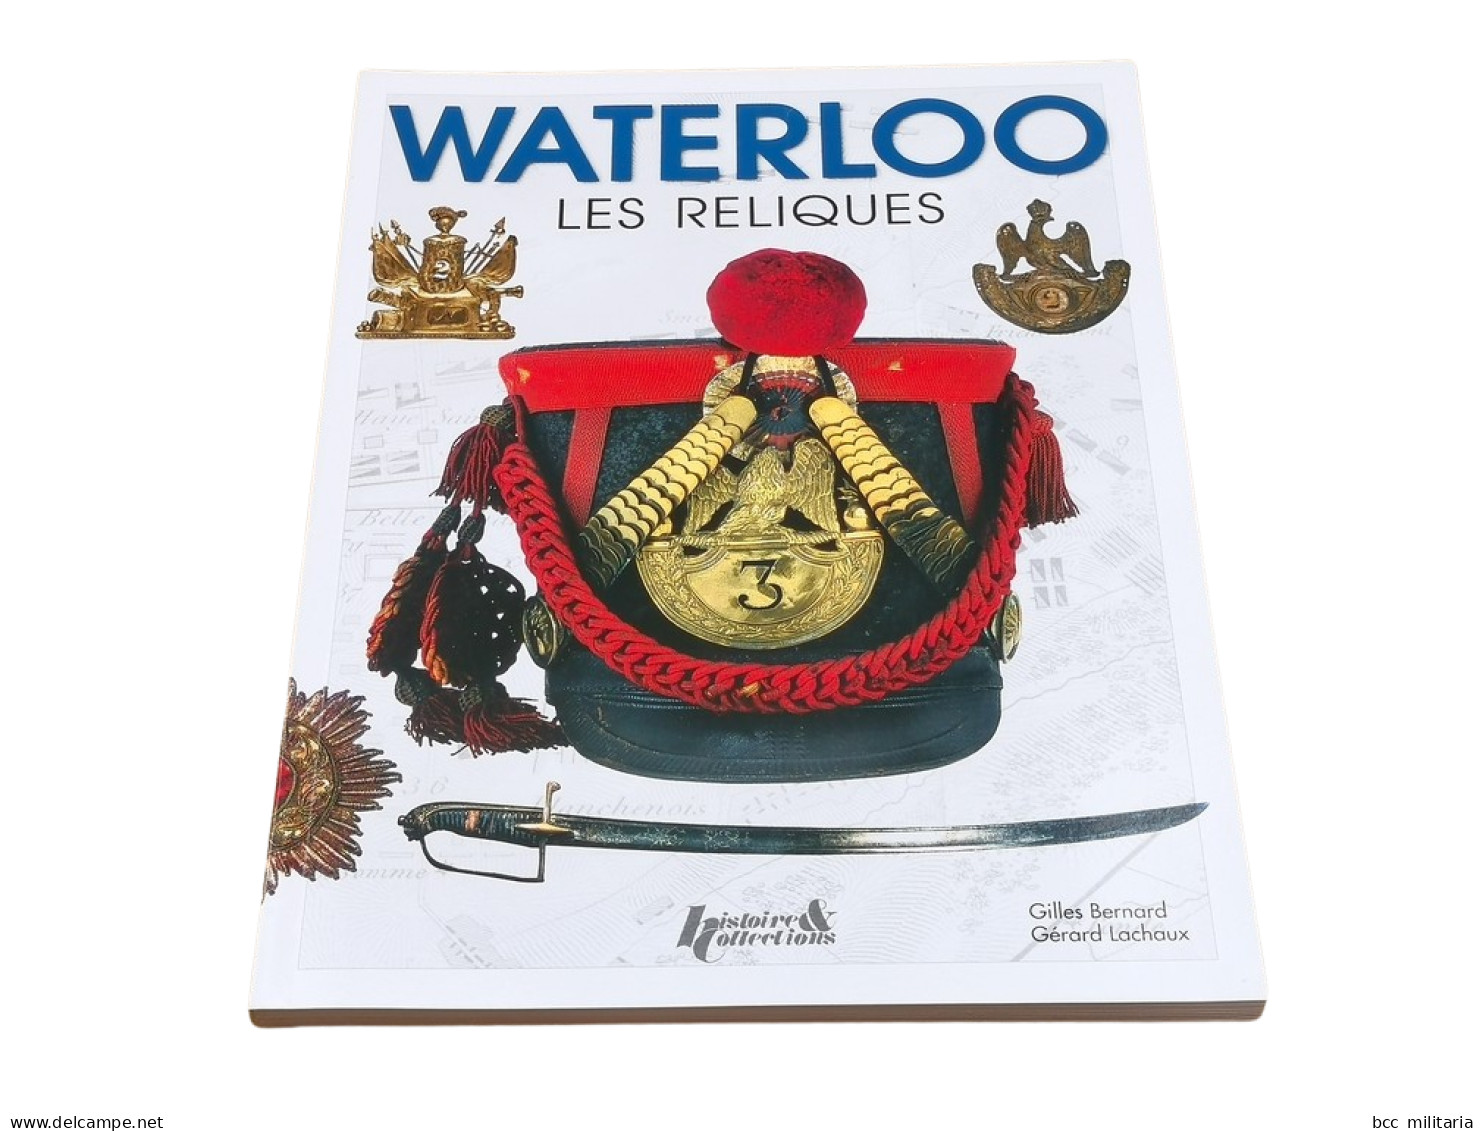 WATERLOO, LES RELIQUES Histoire Et Collections 128 Pages Livre Neuf - French